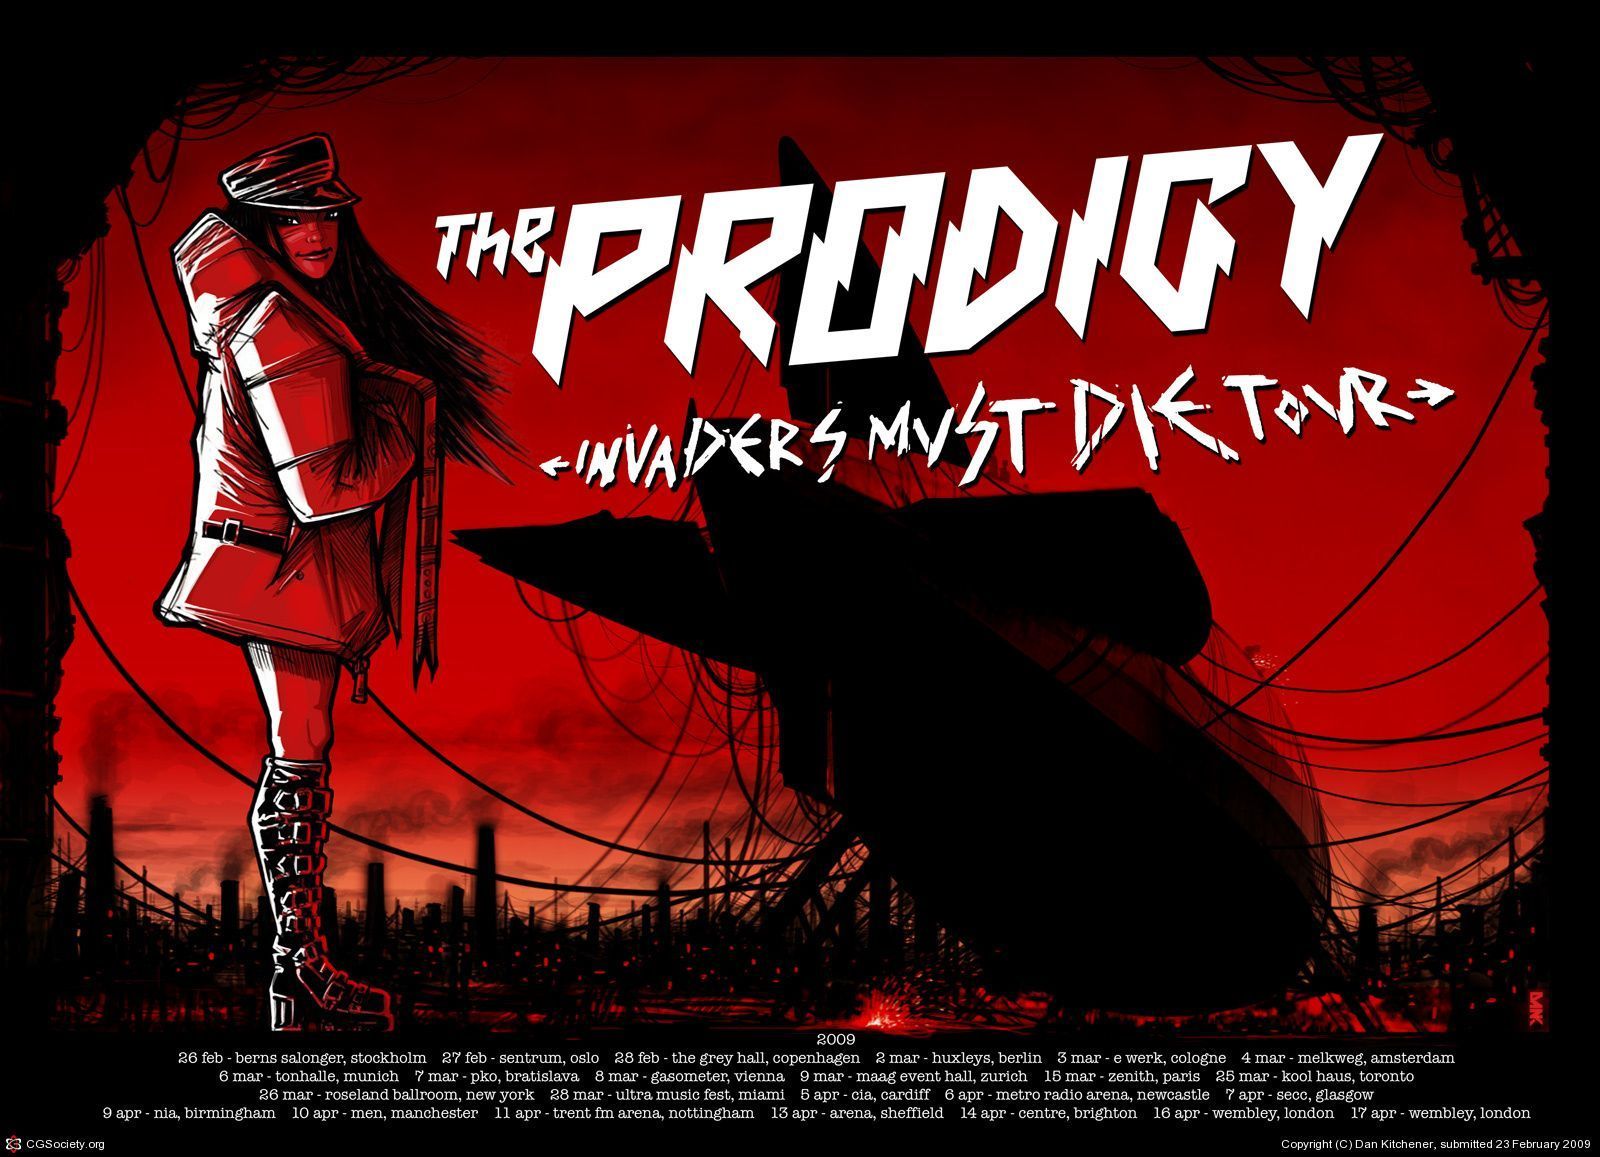 The Prodigy Wallpapers | The Prodigy Fanboy - Liam Howlett Keith ...